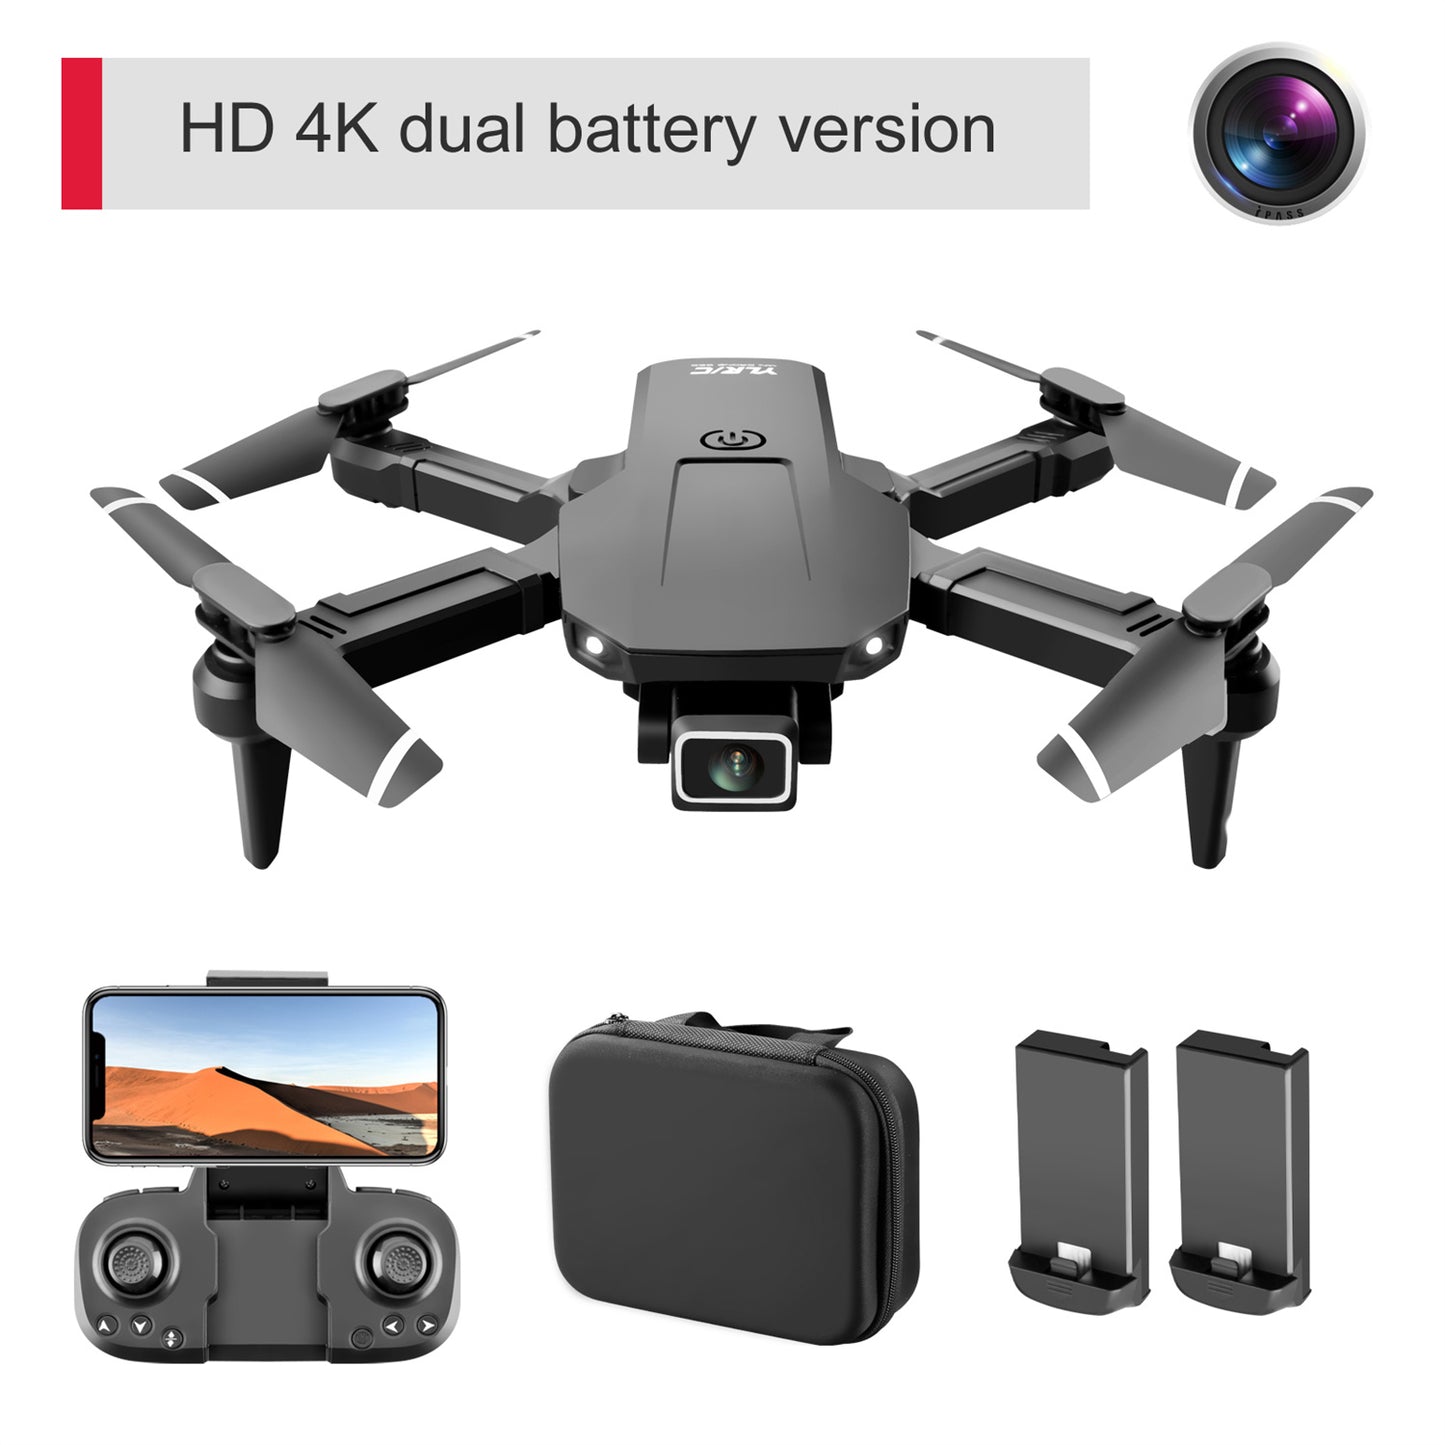 S68 Drone No Camera WiFi Collapsible RC Quadcopter Helicopter Toy-Black-1 Battery